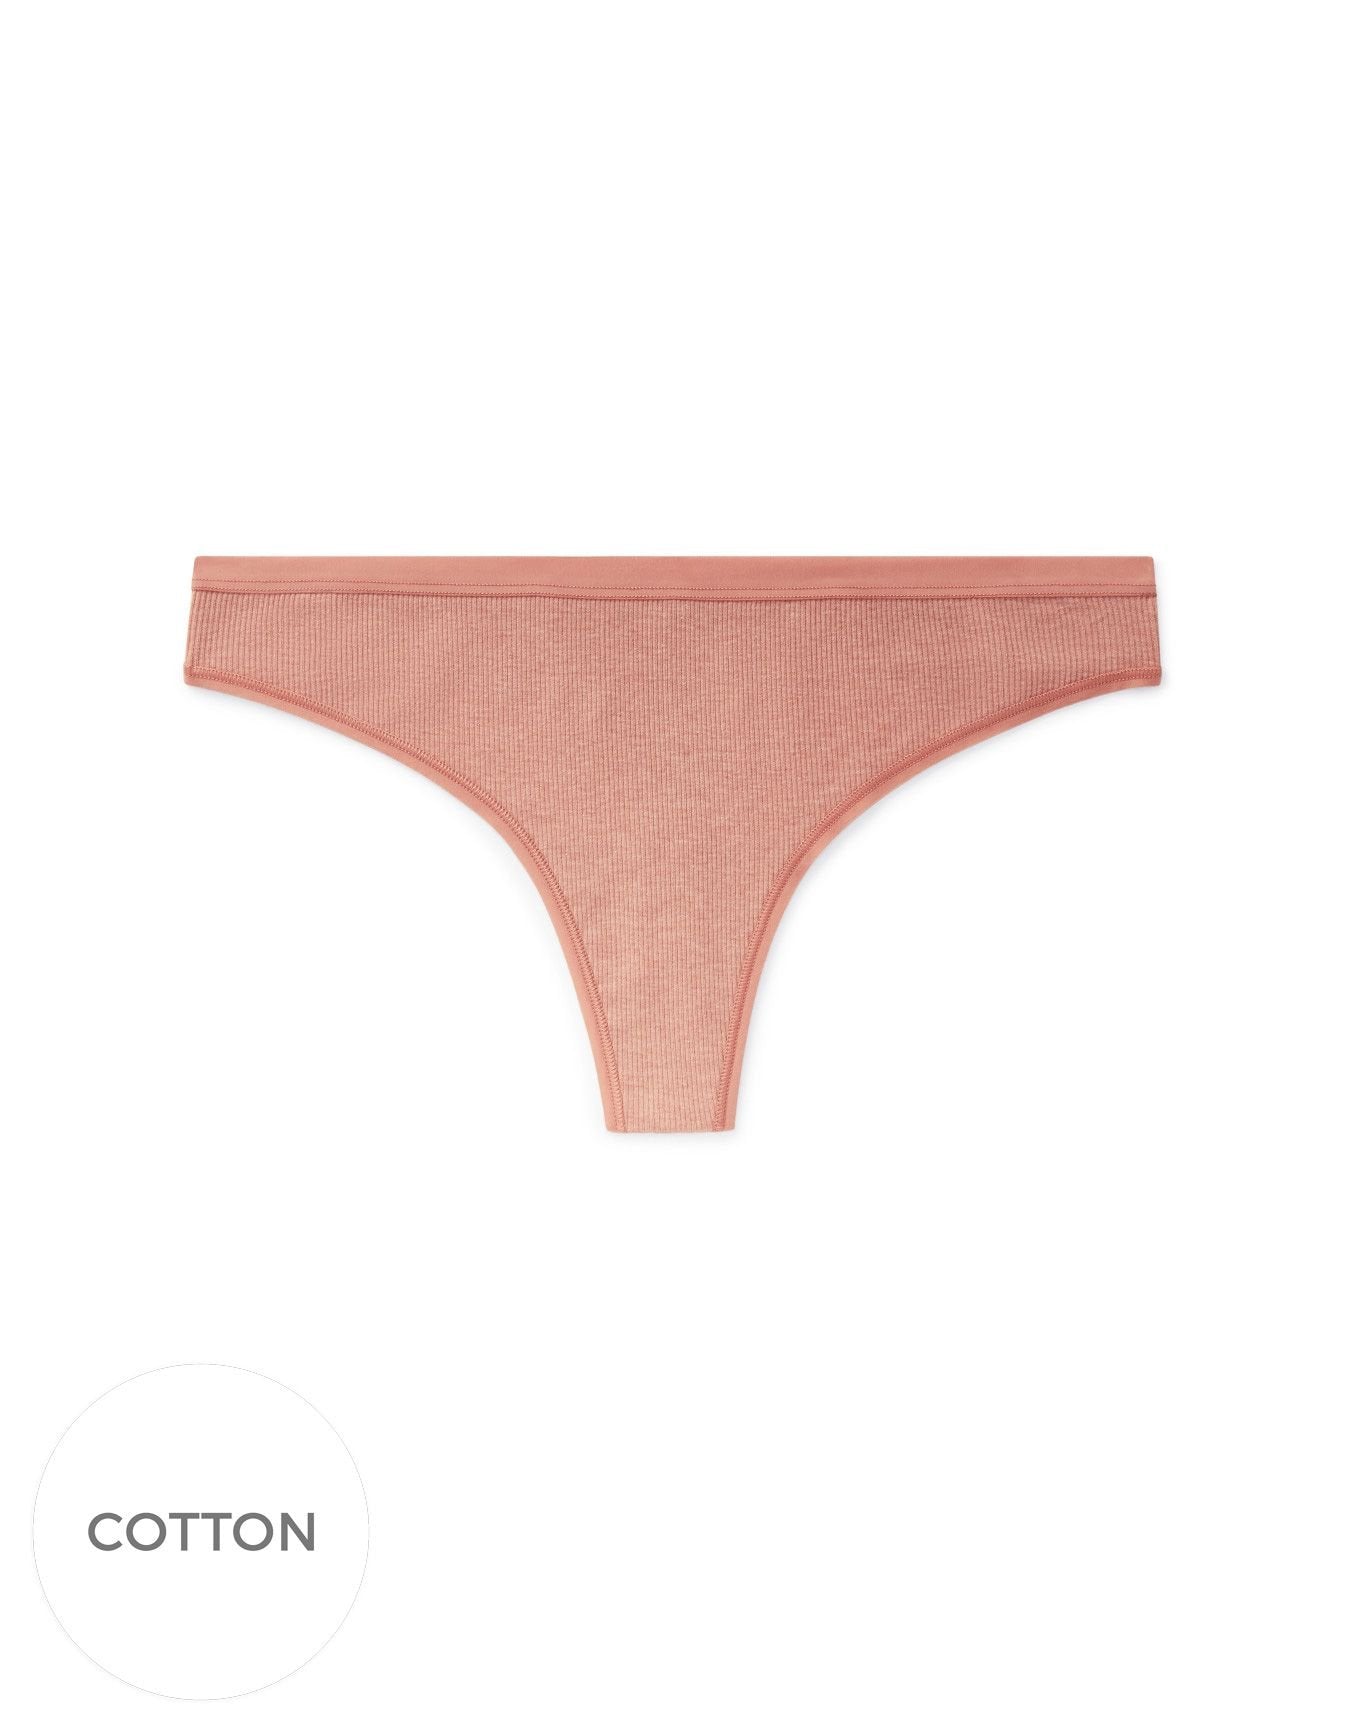 Adore Me Alexandra Ribbed Cotton Thong in color DmslPk 2PT 0E9F and shape thong